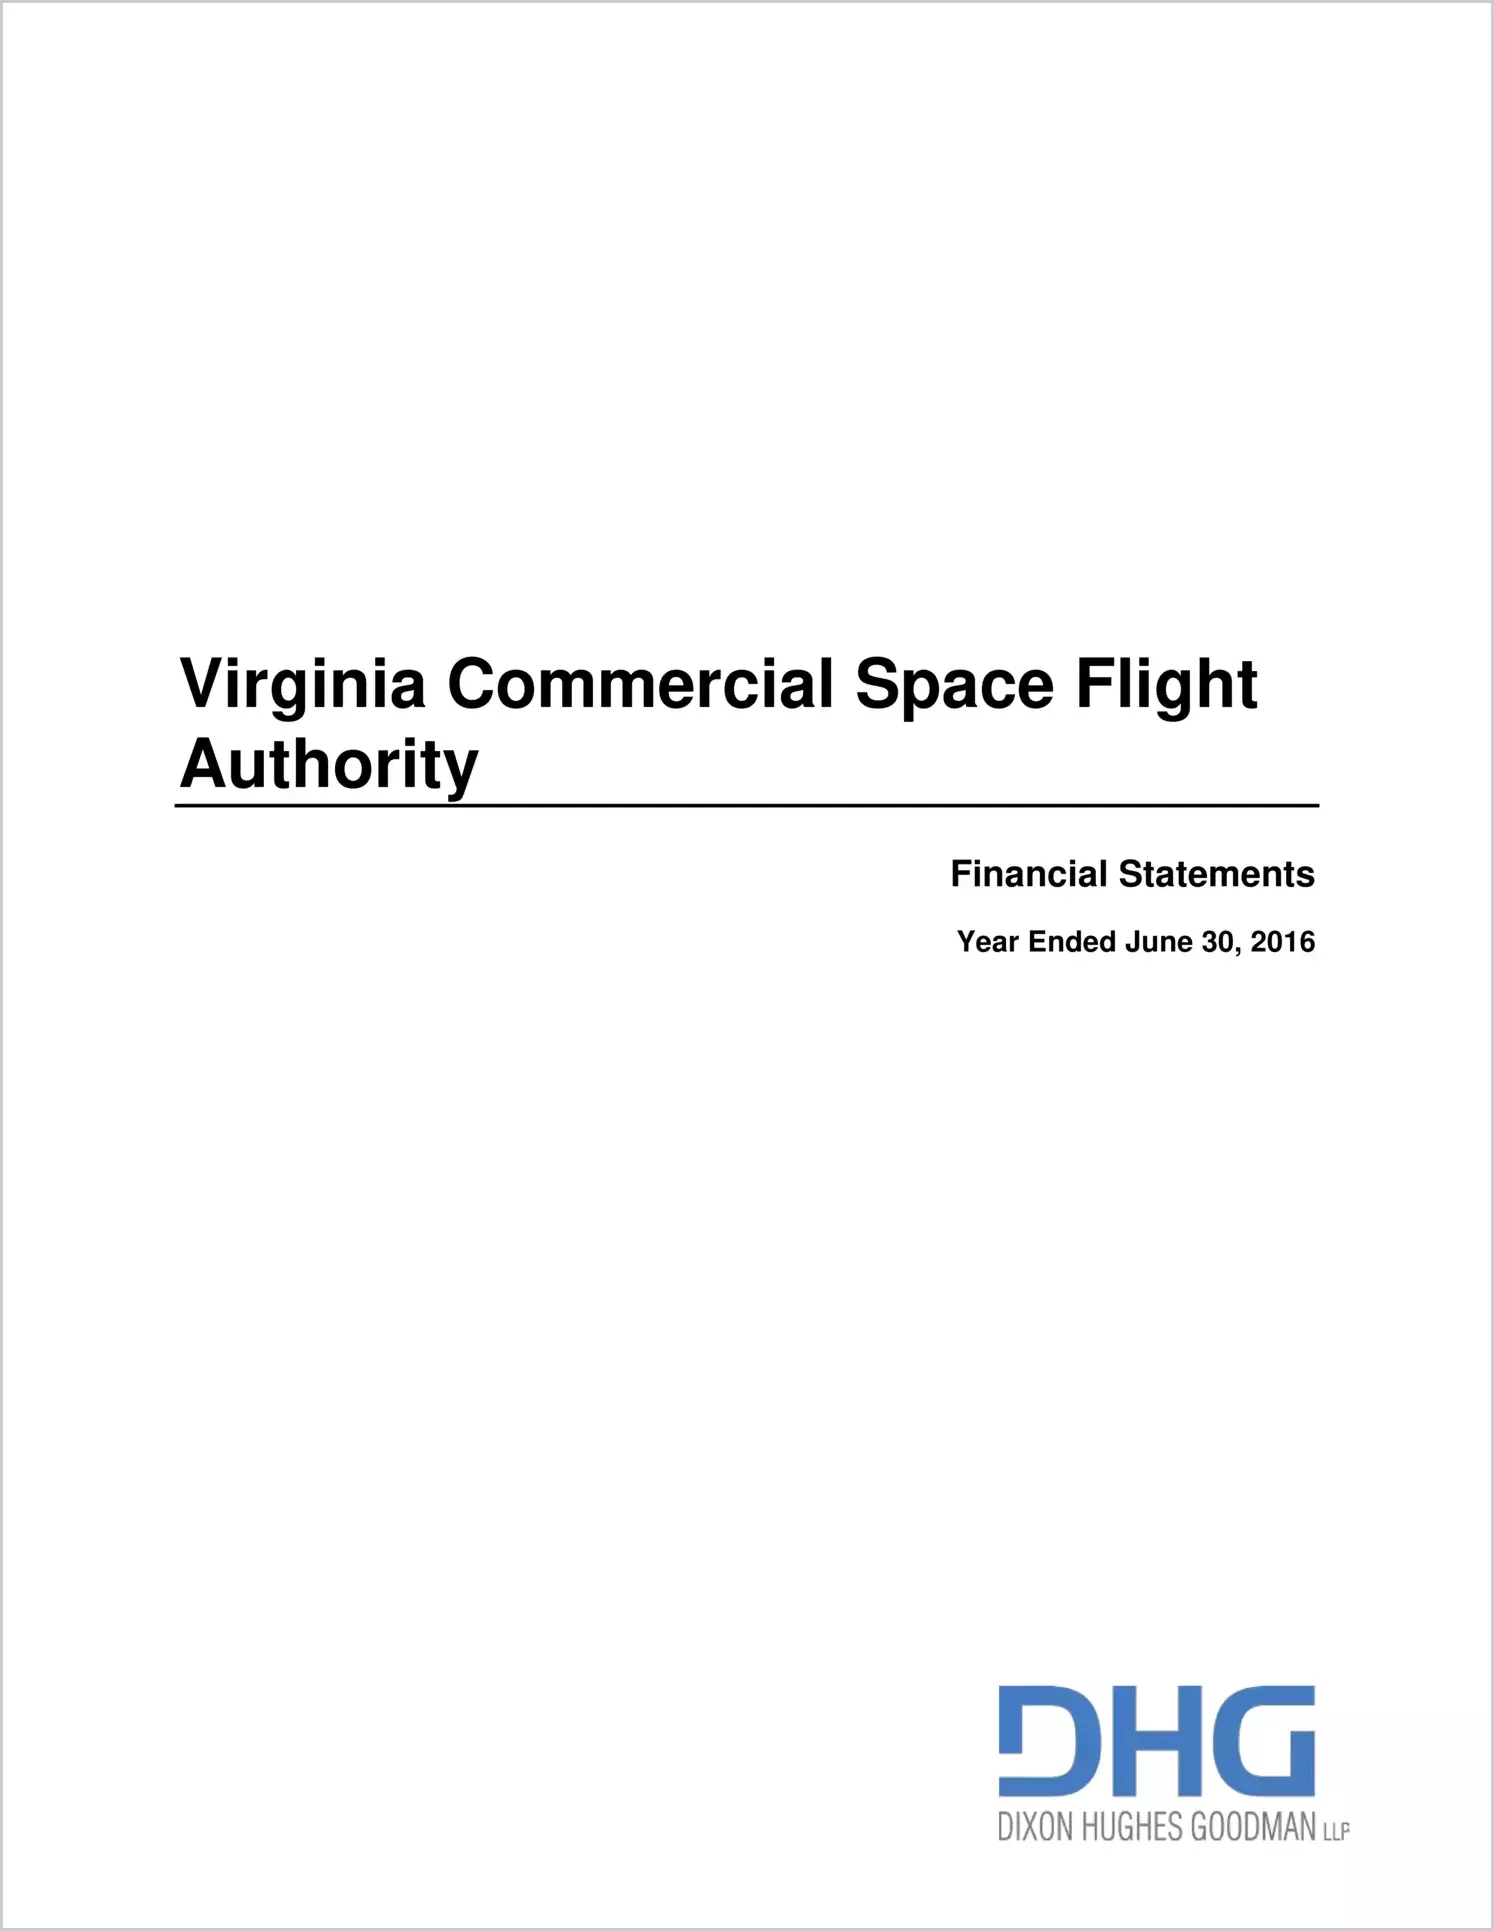 Virginia Commercial Space Flight Authority Financial Statements for the year ended June 30, 2016